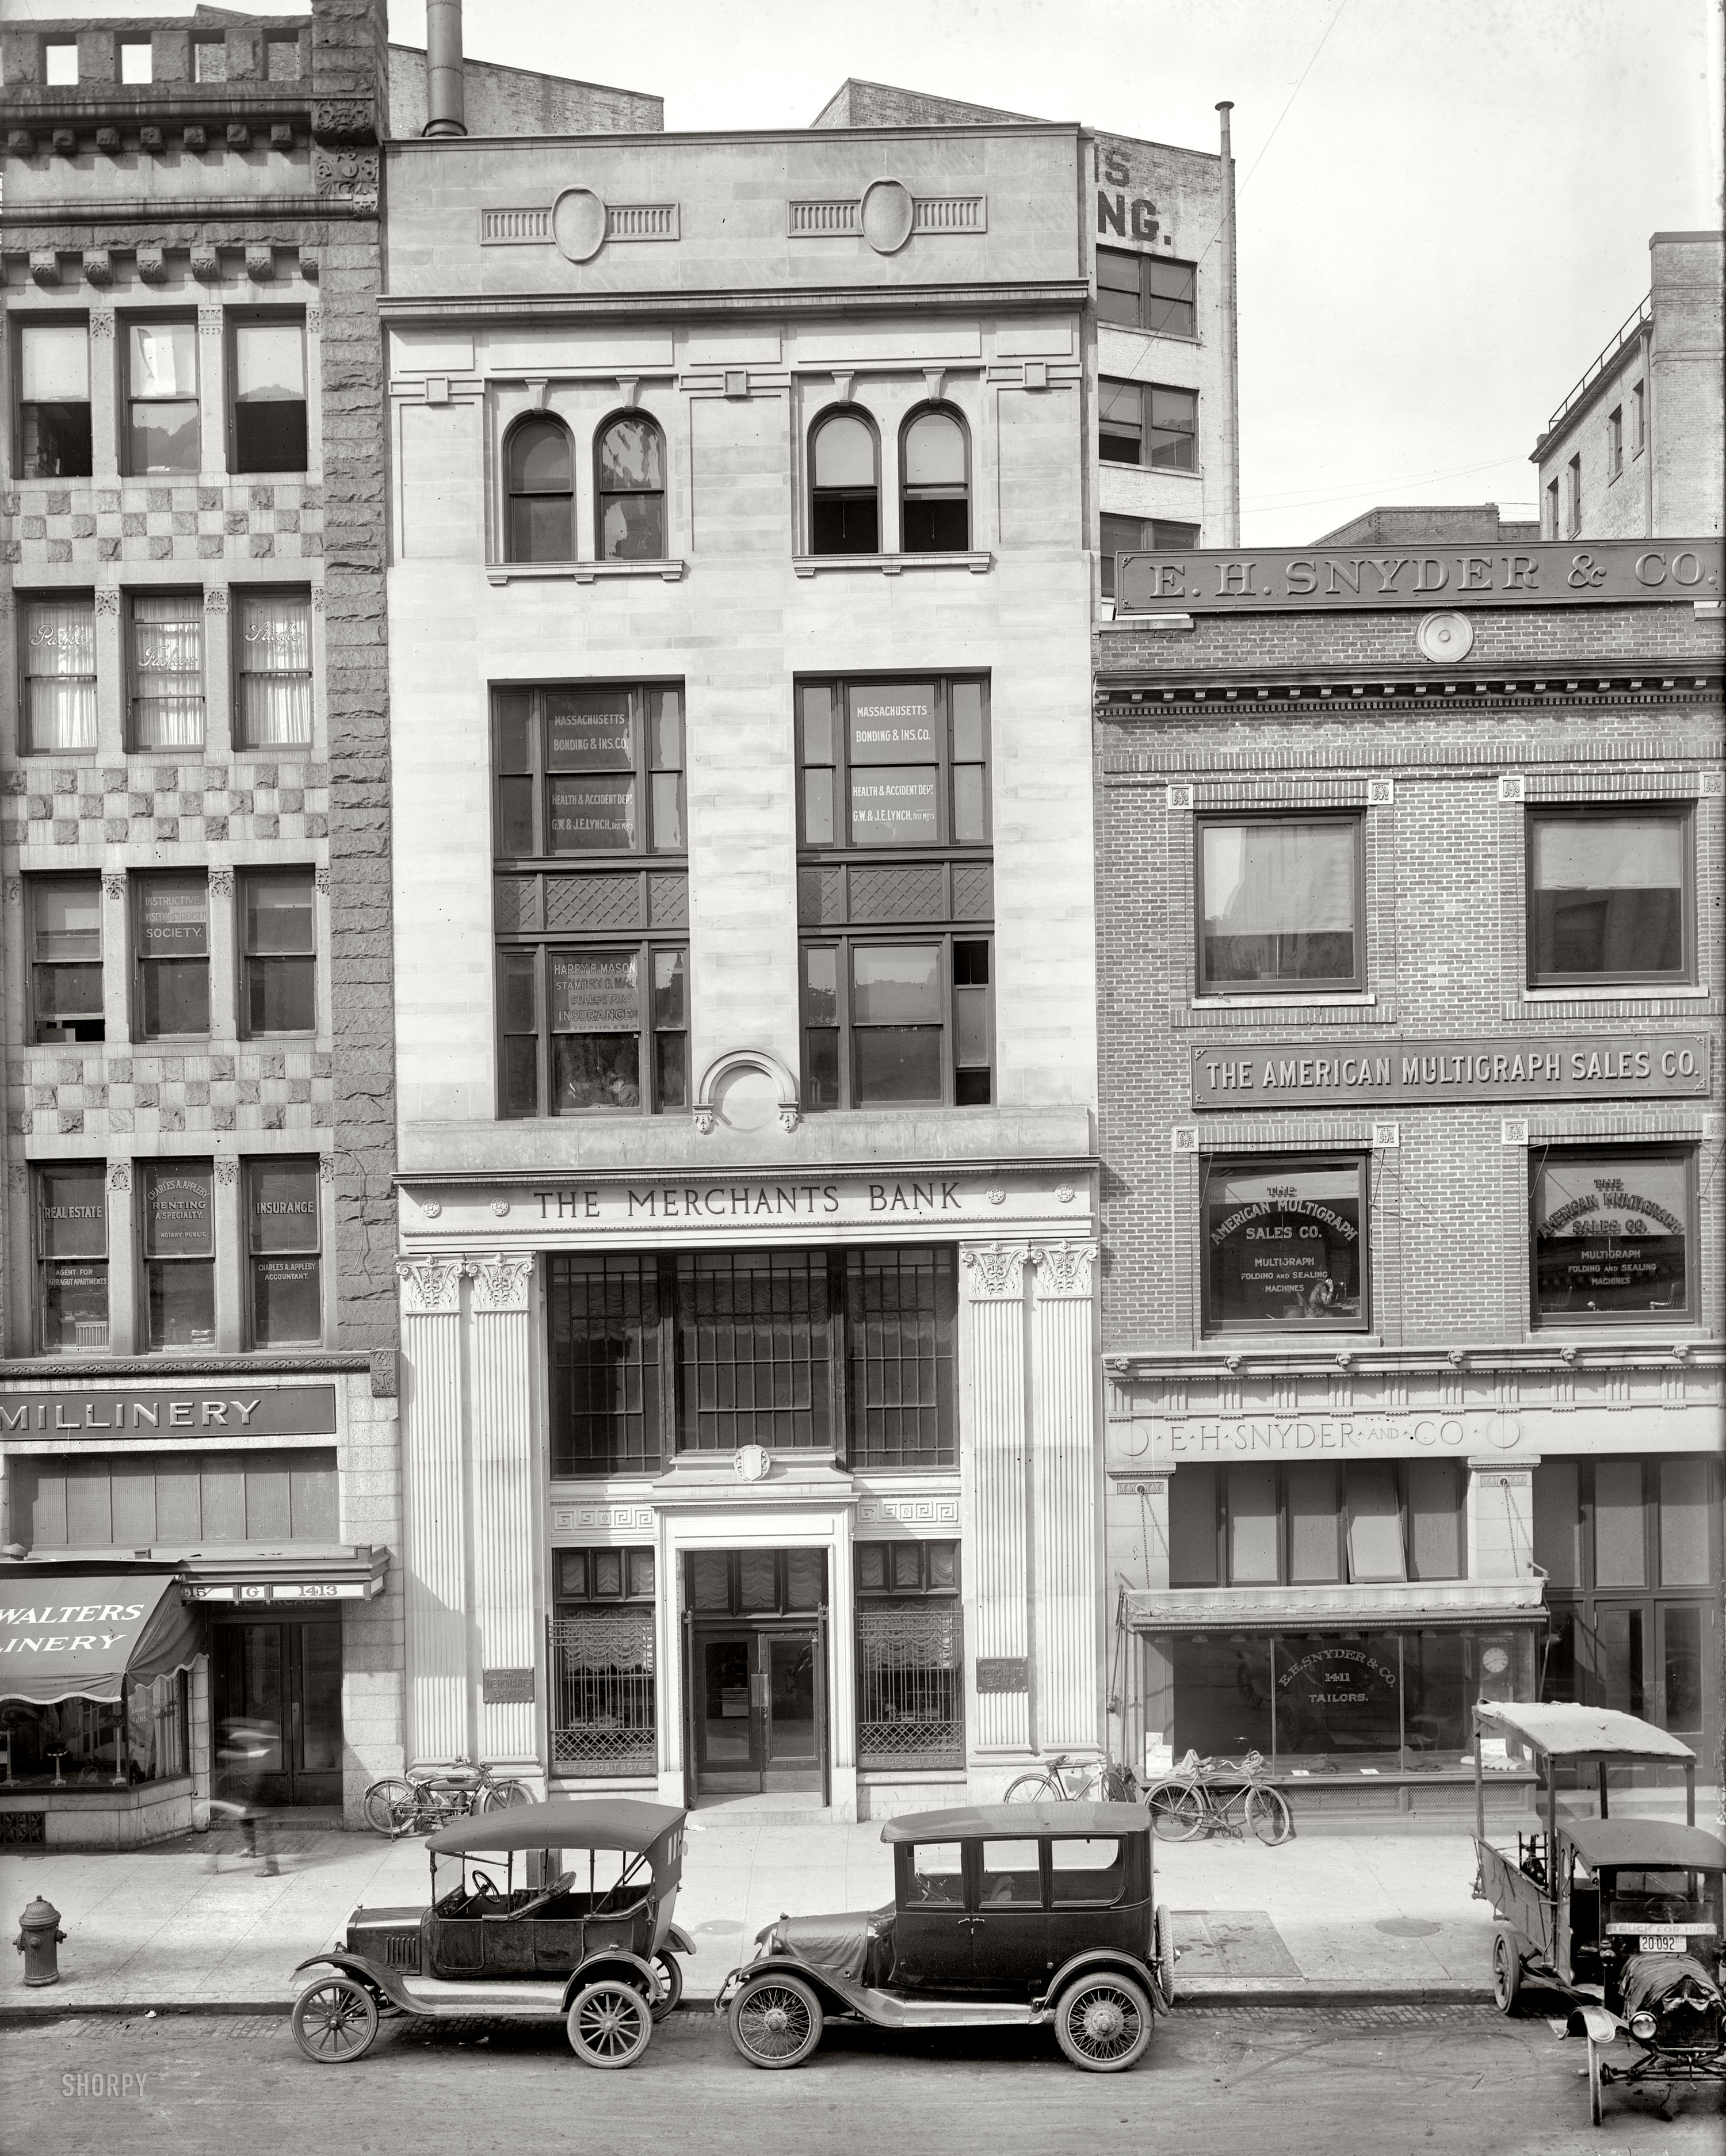 Washington, D.C., circa 1920. "Merchants Bank, G Street N.W." What looks at first like a fairly desolate street scene turns out to have a number of players. National Photo Company Collection glass negative. View full size.